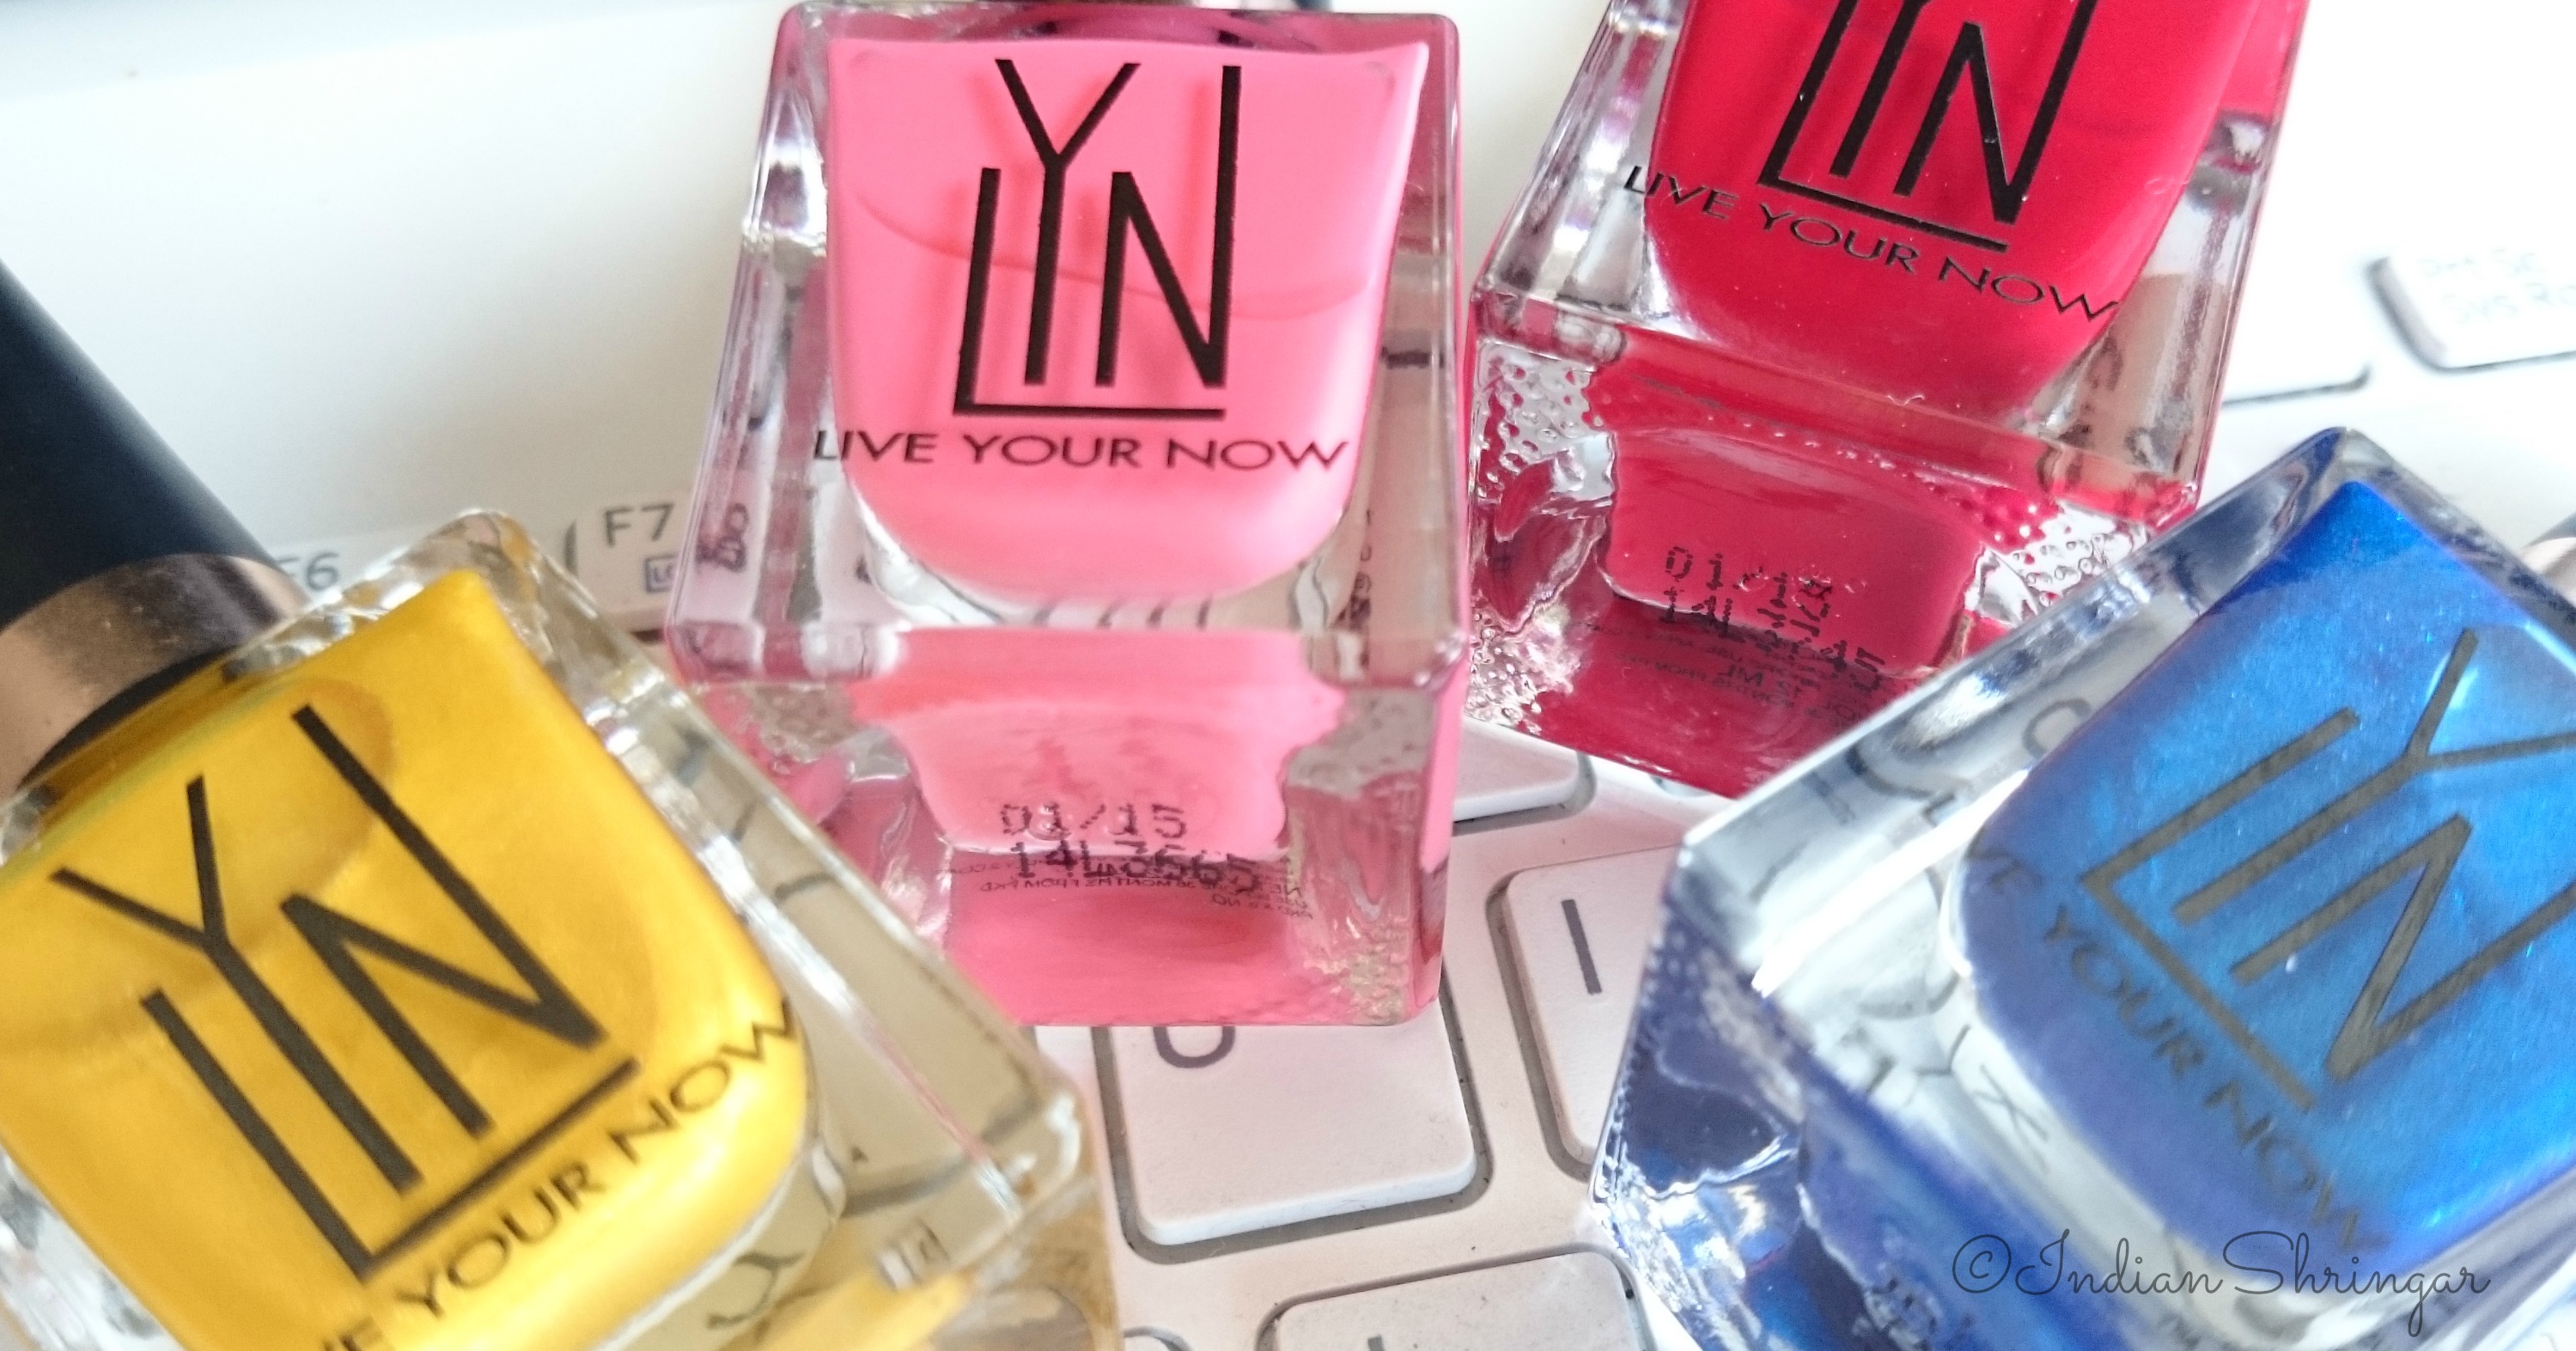 LYN Live Your Now nail polishes, review, swatches and price in India